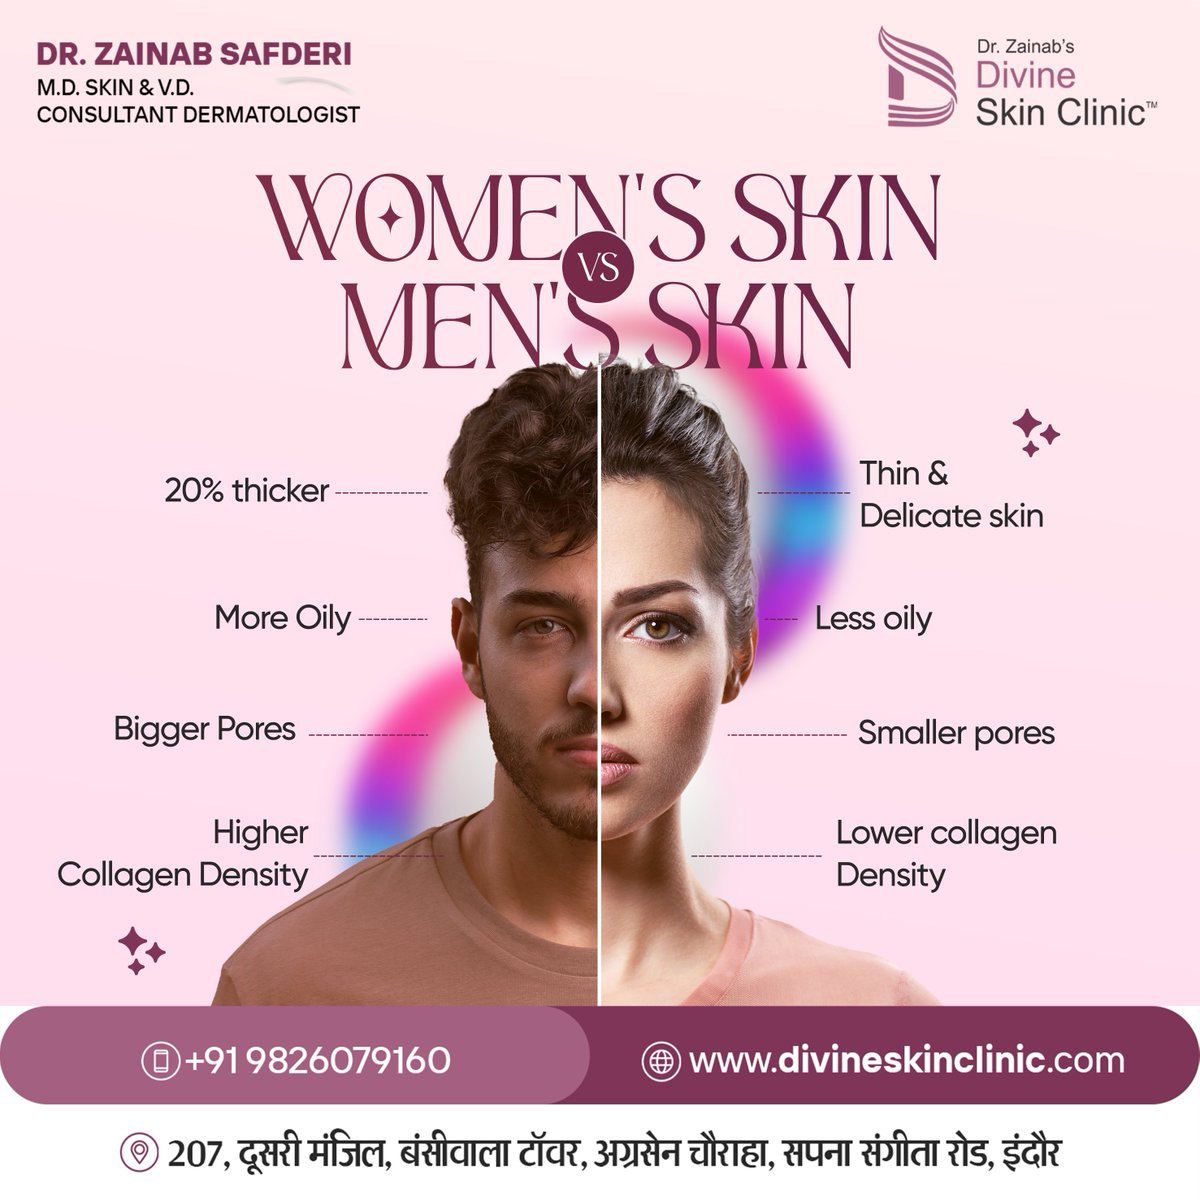 Skin Fact: Women’s skin is thin, delicate, with smaller pores, while men’s is thicker, more oily, and has larger pores✨🤓 Consult Dr. Zainab Safderi! 📞+91 9826079160 📍207, Bansiwala Tower, Near, Agrasen Square, Navlakha, Indore #BeautyDiversity #SkinScience #MenVsWomen